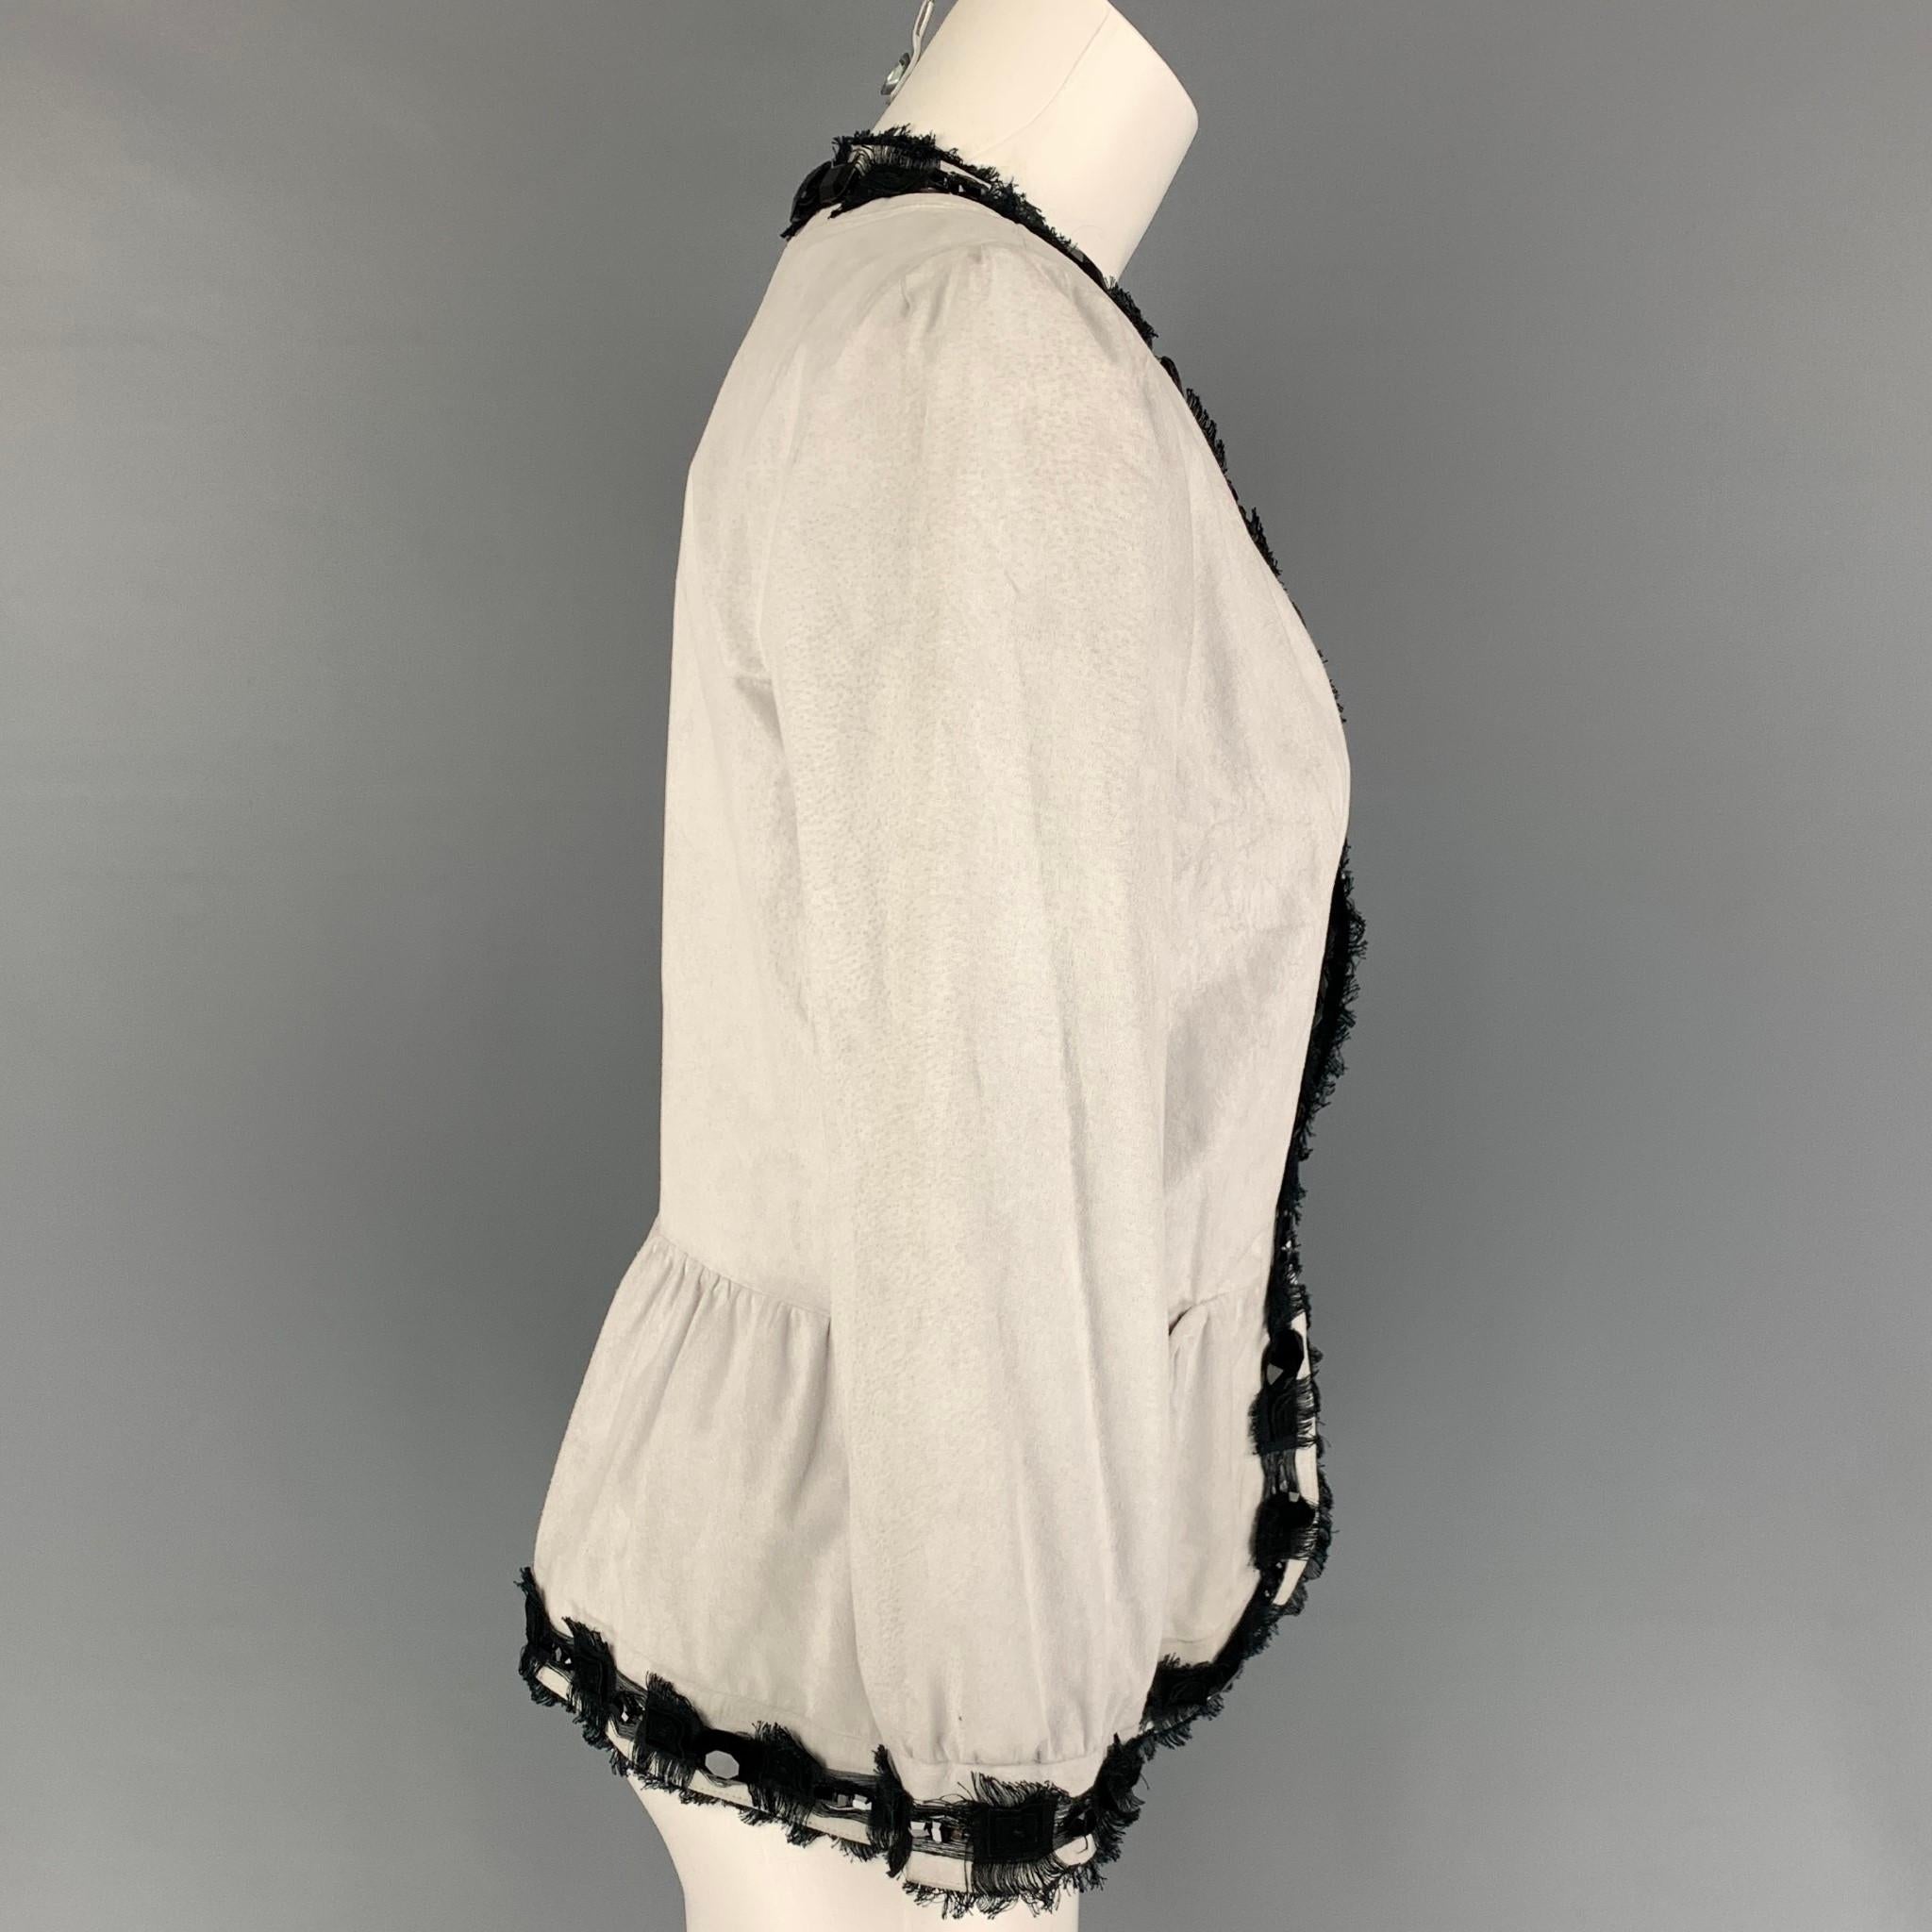 YVES SAINT LAURENT jacket comes in a off white leather with a black linen trim featuring large crystal embellishments, front pockets, and a hook & loop closure. Made in Italy. 

Very Good Pre-Owned Condition.
Marked: 38

Measurements:

Shoulder: 14